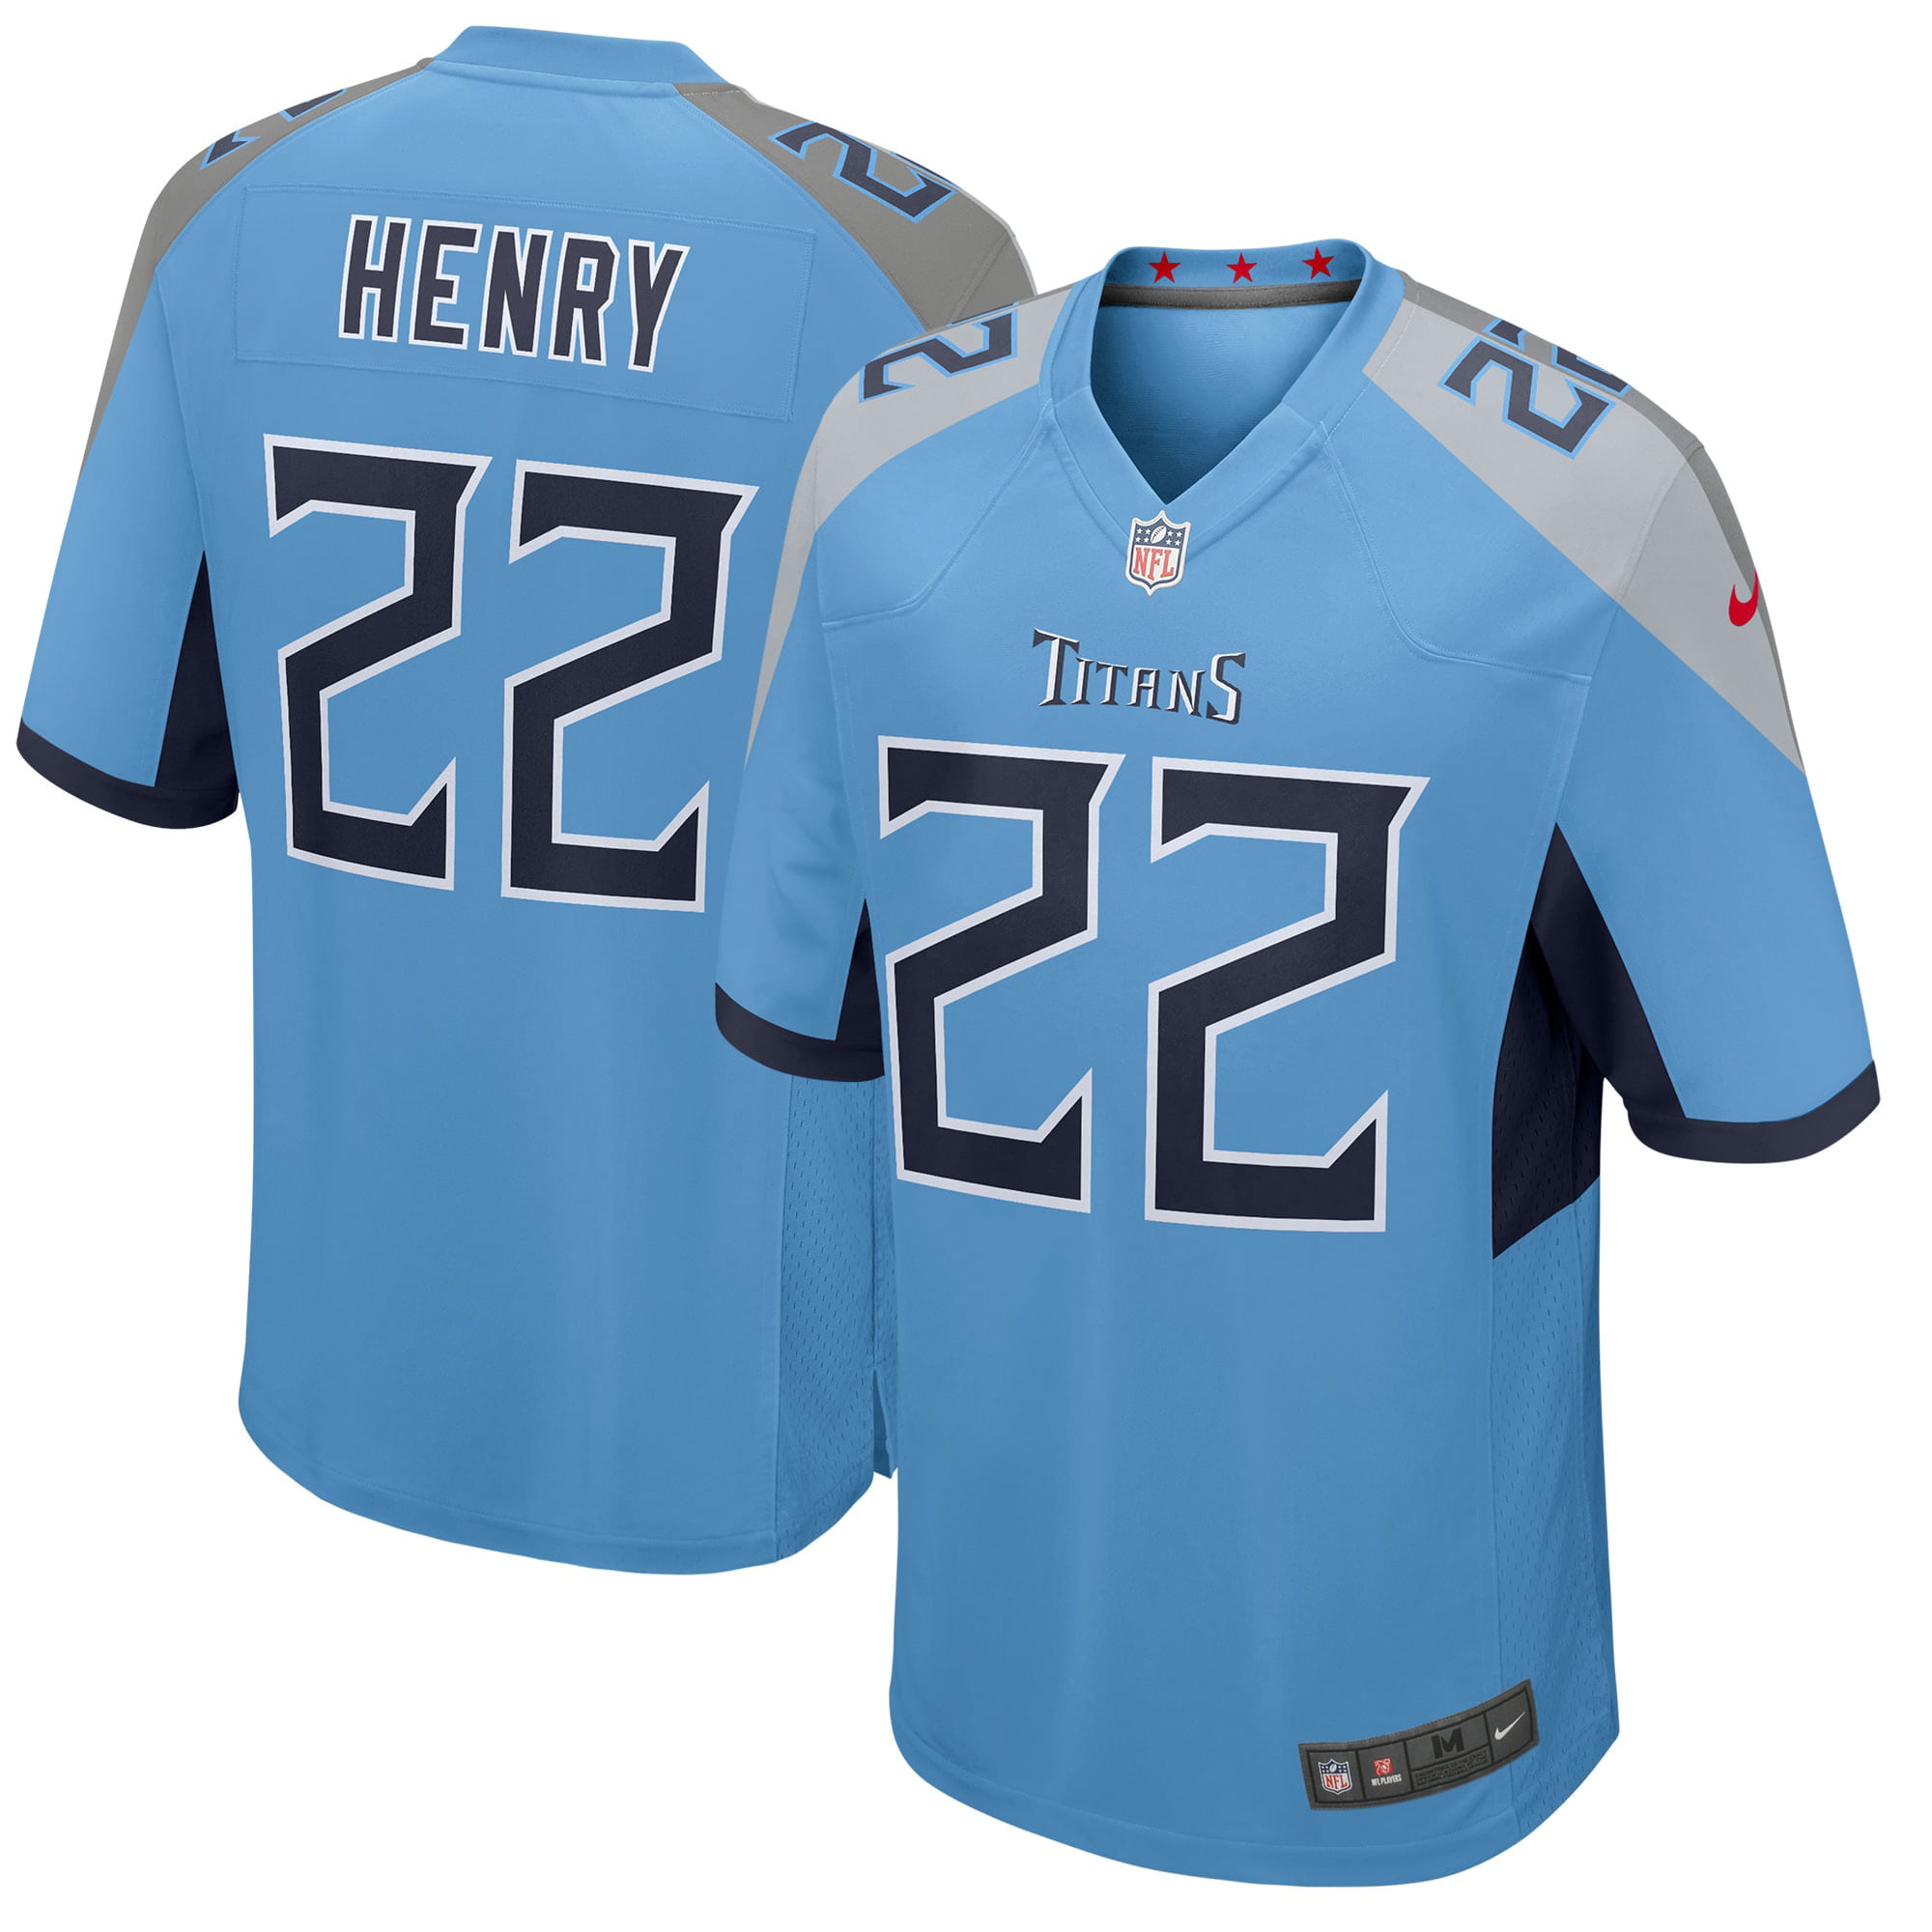 Tennessee Titans Pet Dog Football Jersey Alternate LARGE